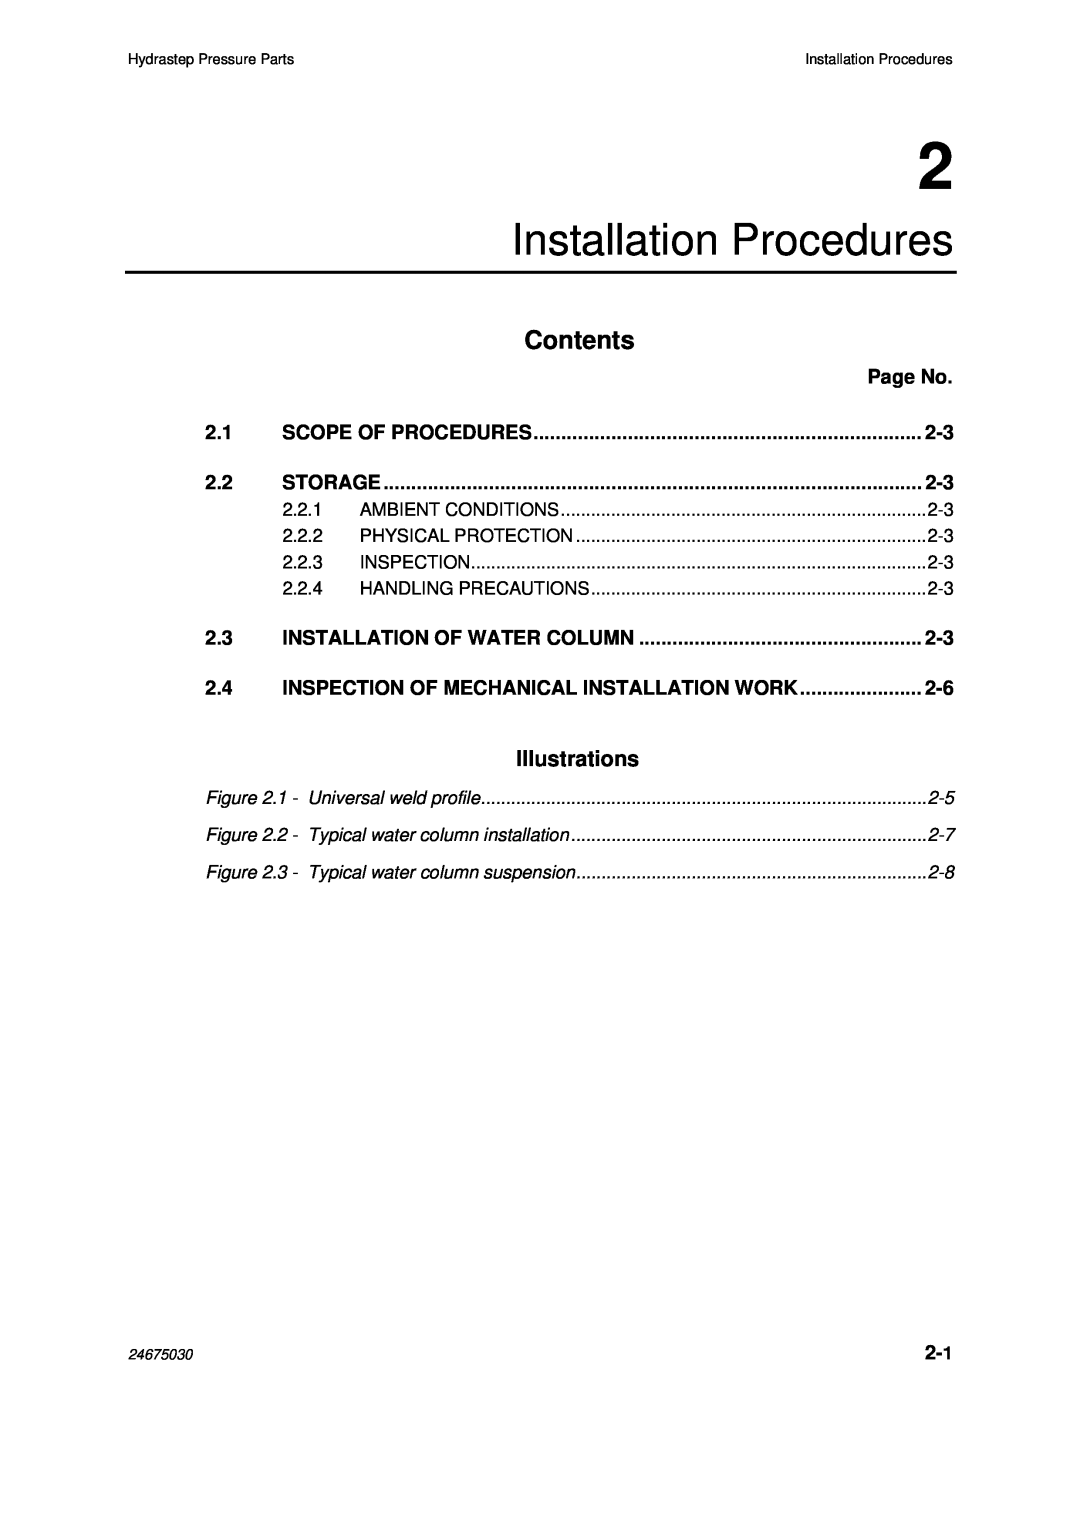 Emerson 2468CD, 2468CB Installation Procedures, Contents, Illustrations, Page No, Scope Of Procedures, Storage, 24675030 